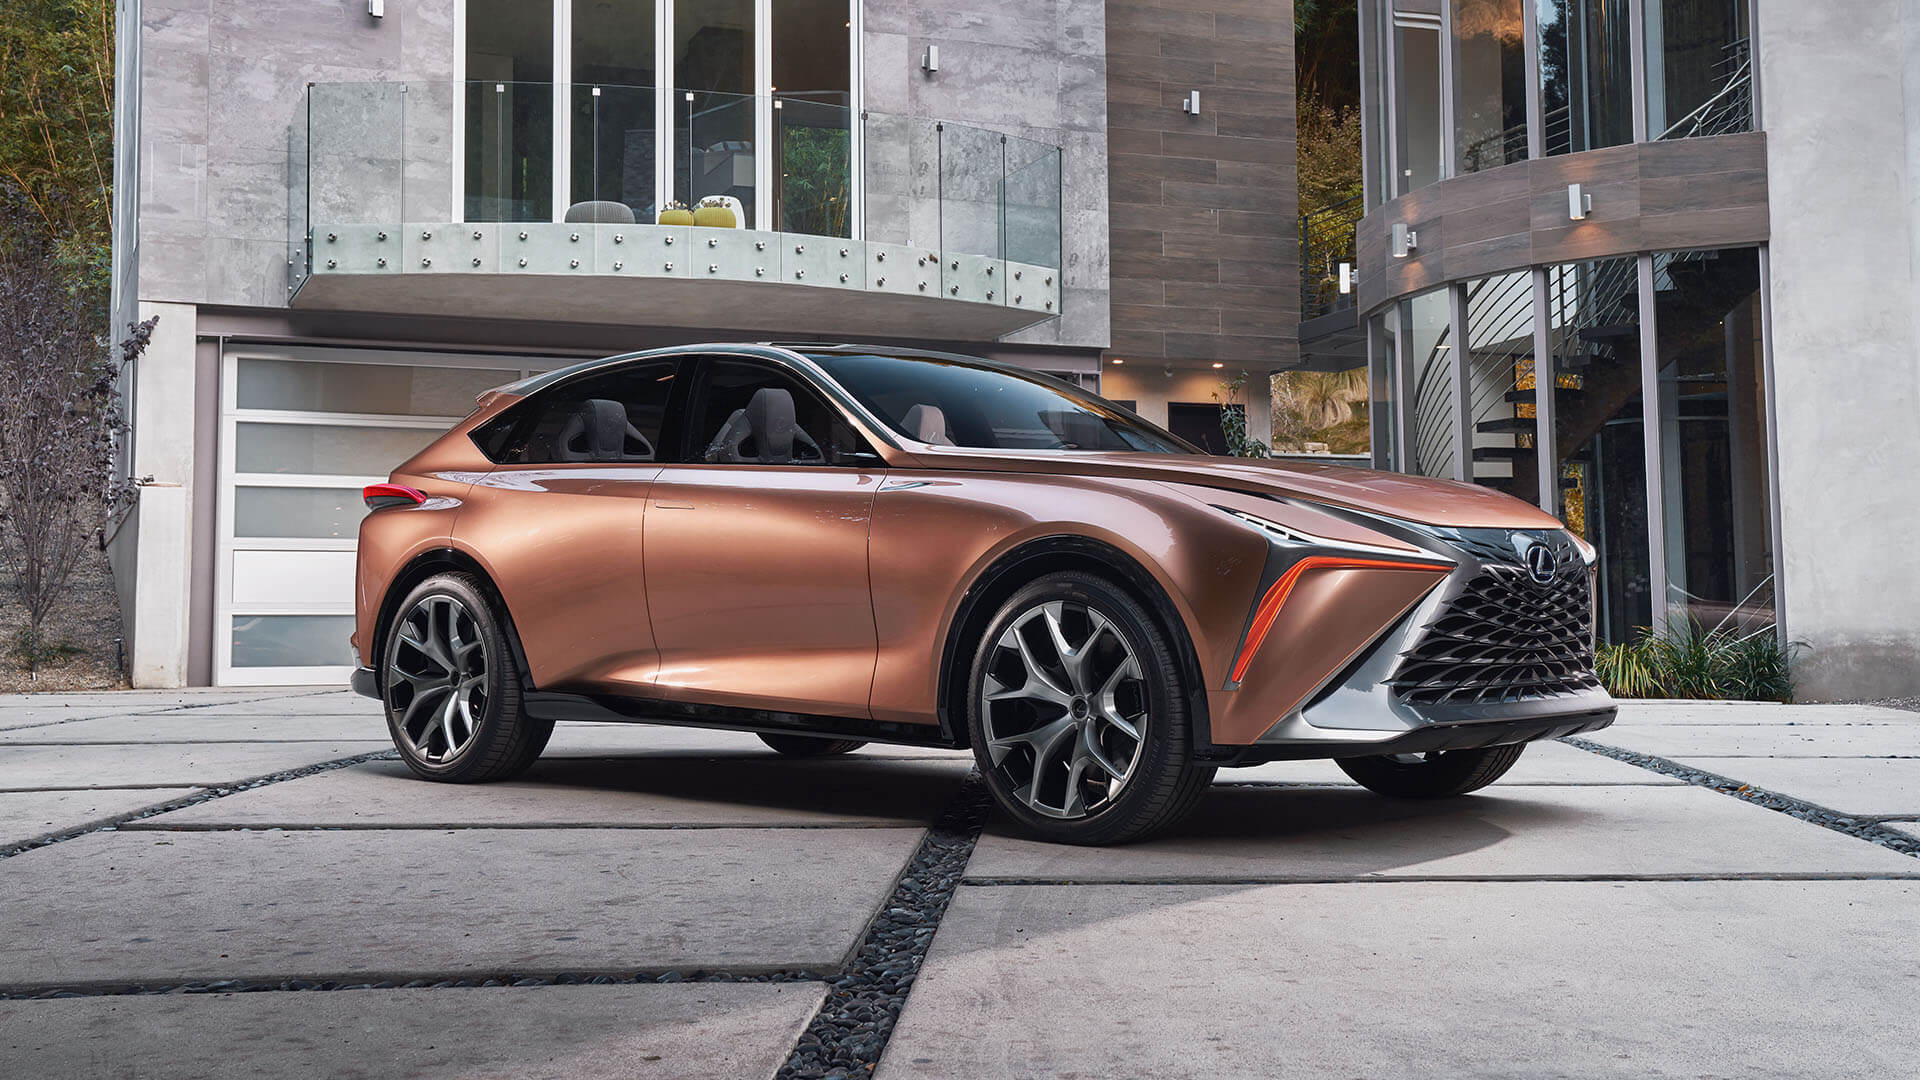 side view of the Lexus LF-1 Limitless